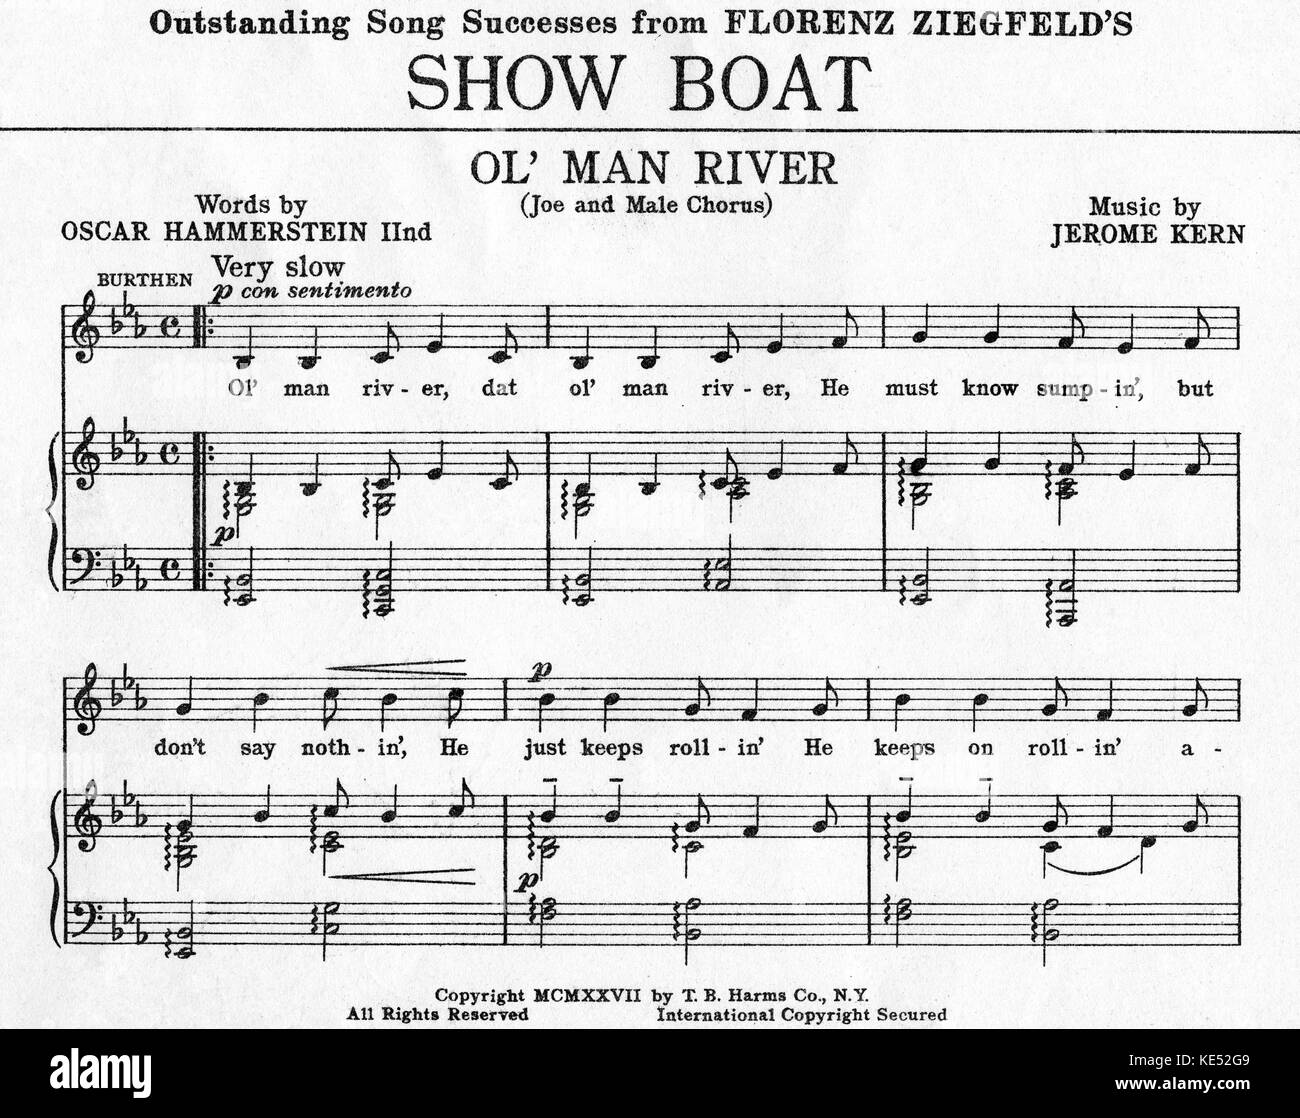 SHOW BOAT 'Ol Man River Words by Oscar Hammerstein II, music by Jerome Kern. Ol' Man River score.   Published New York, TB Harms,1927. Stock Photo